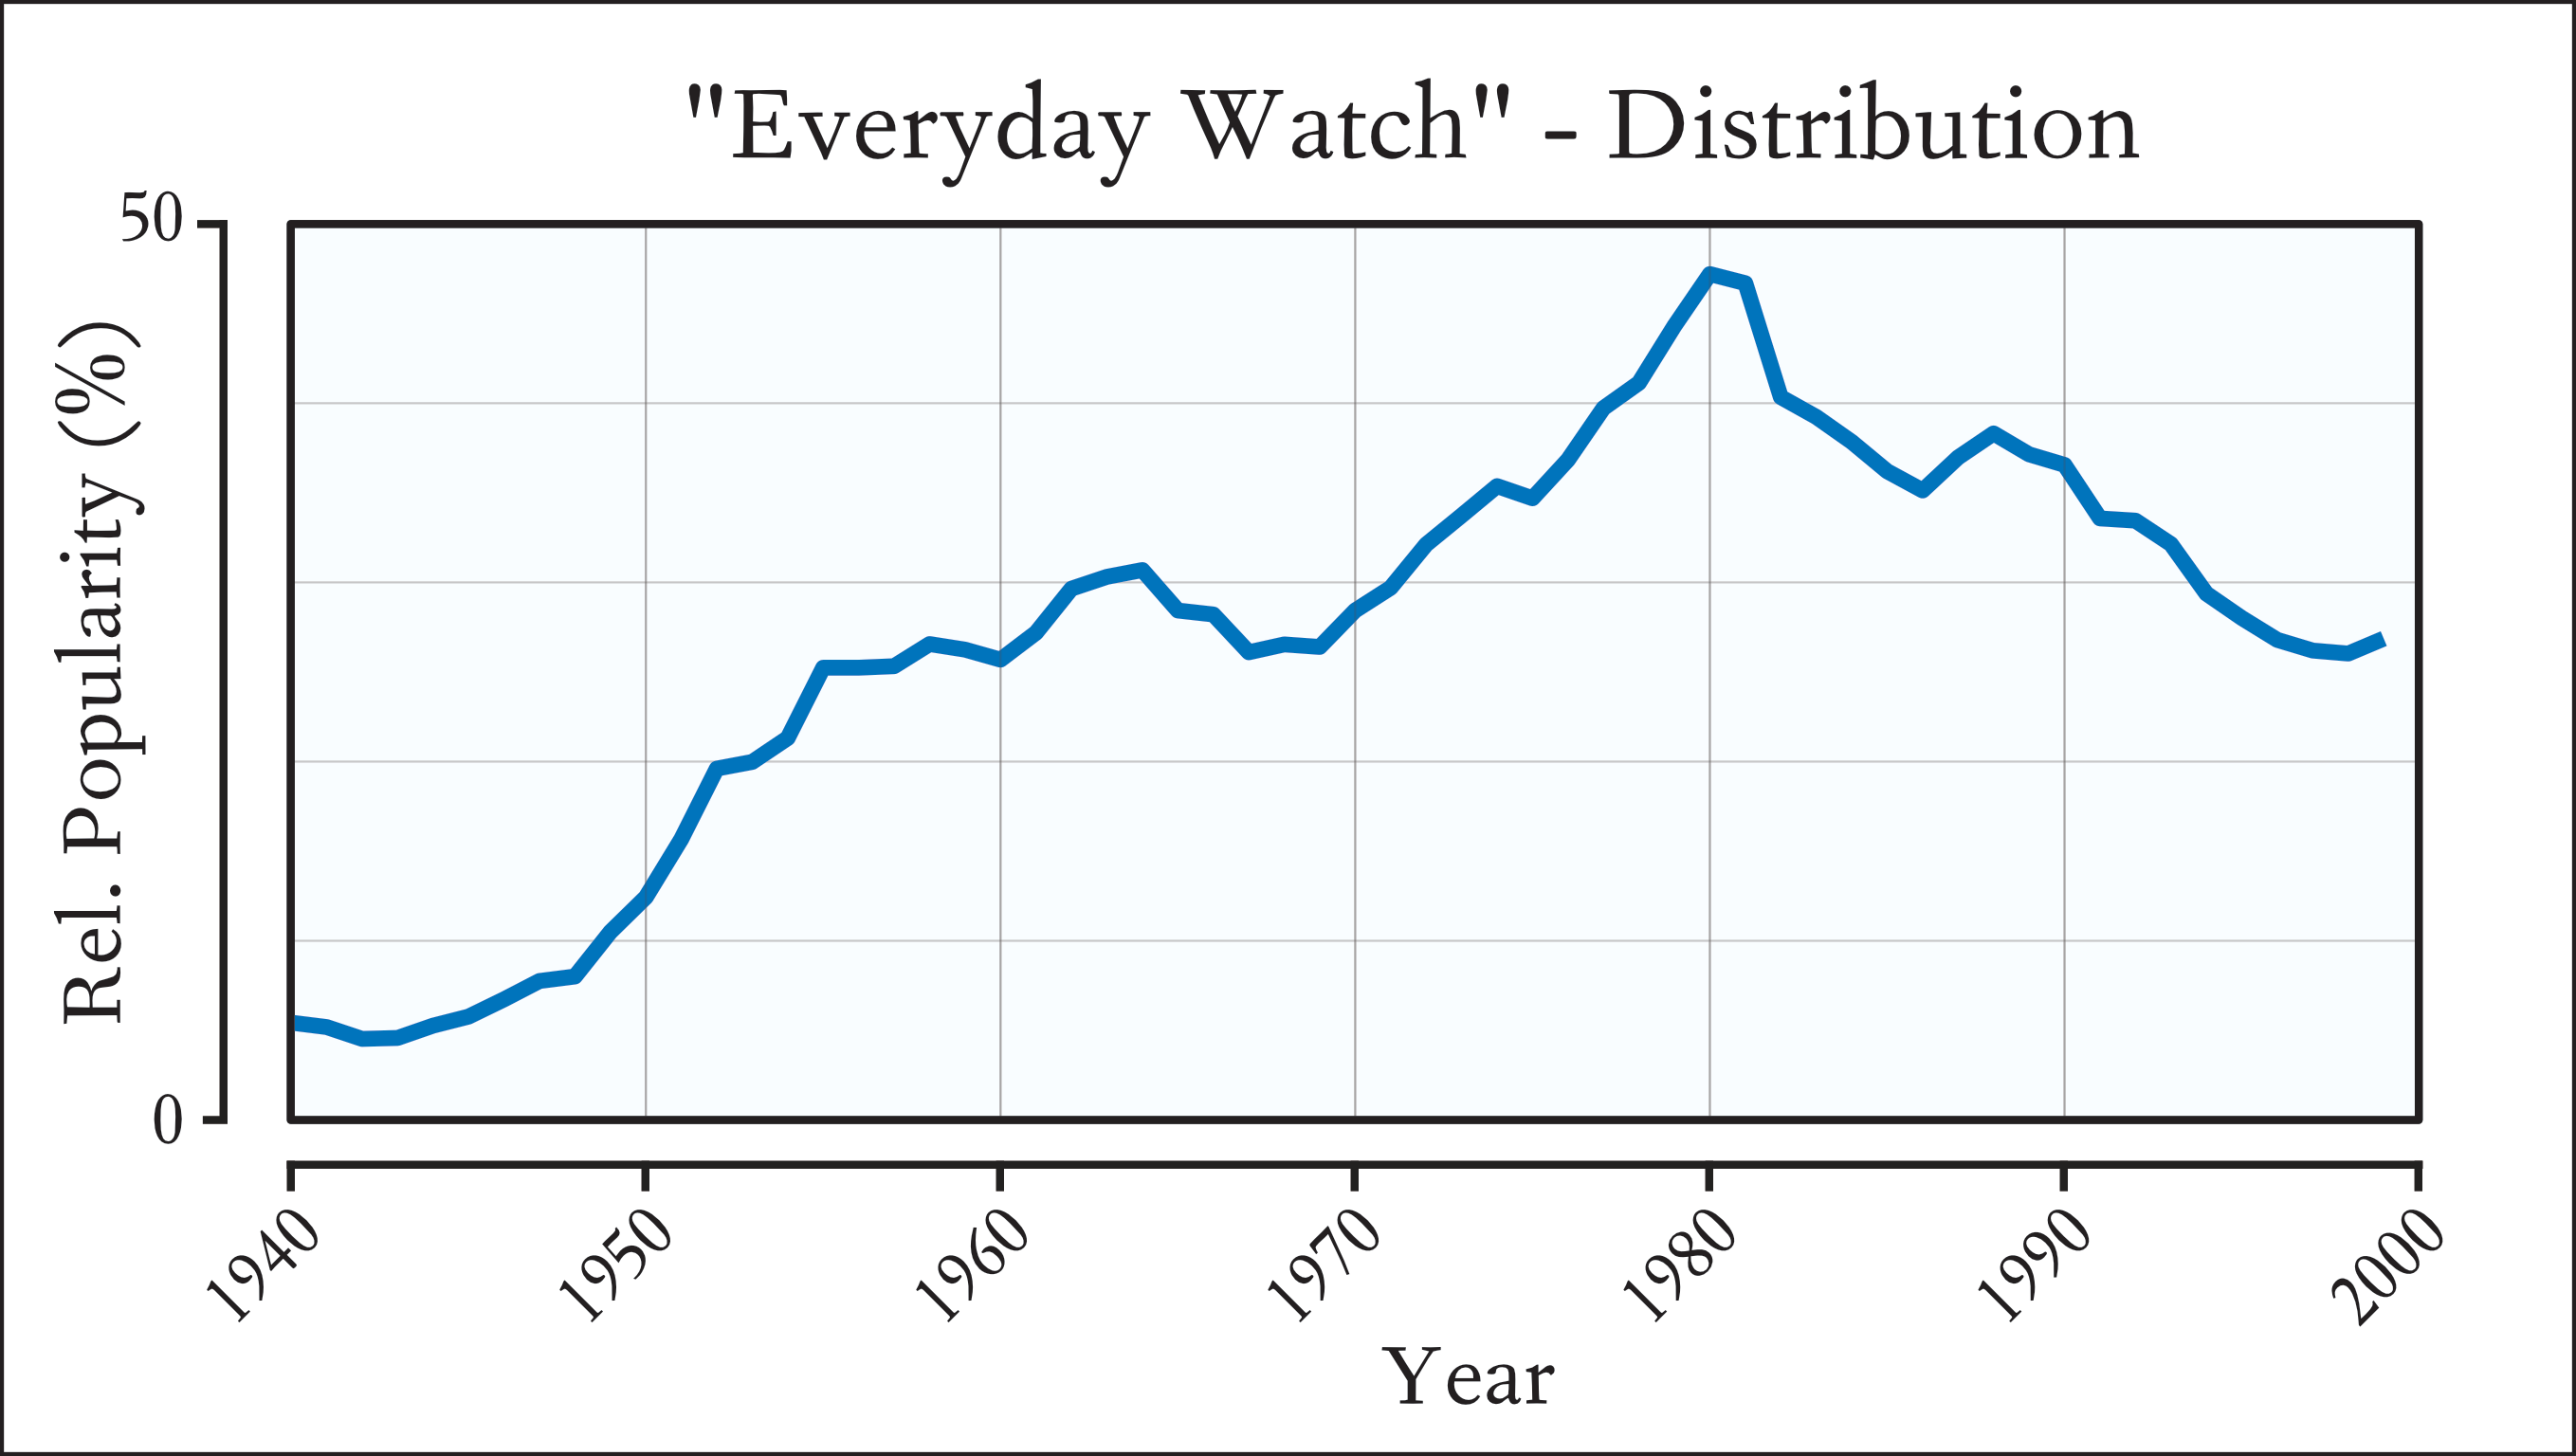 Distribution of dress casual watch popularity between 1940-2000